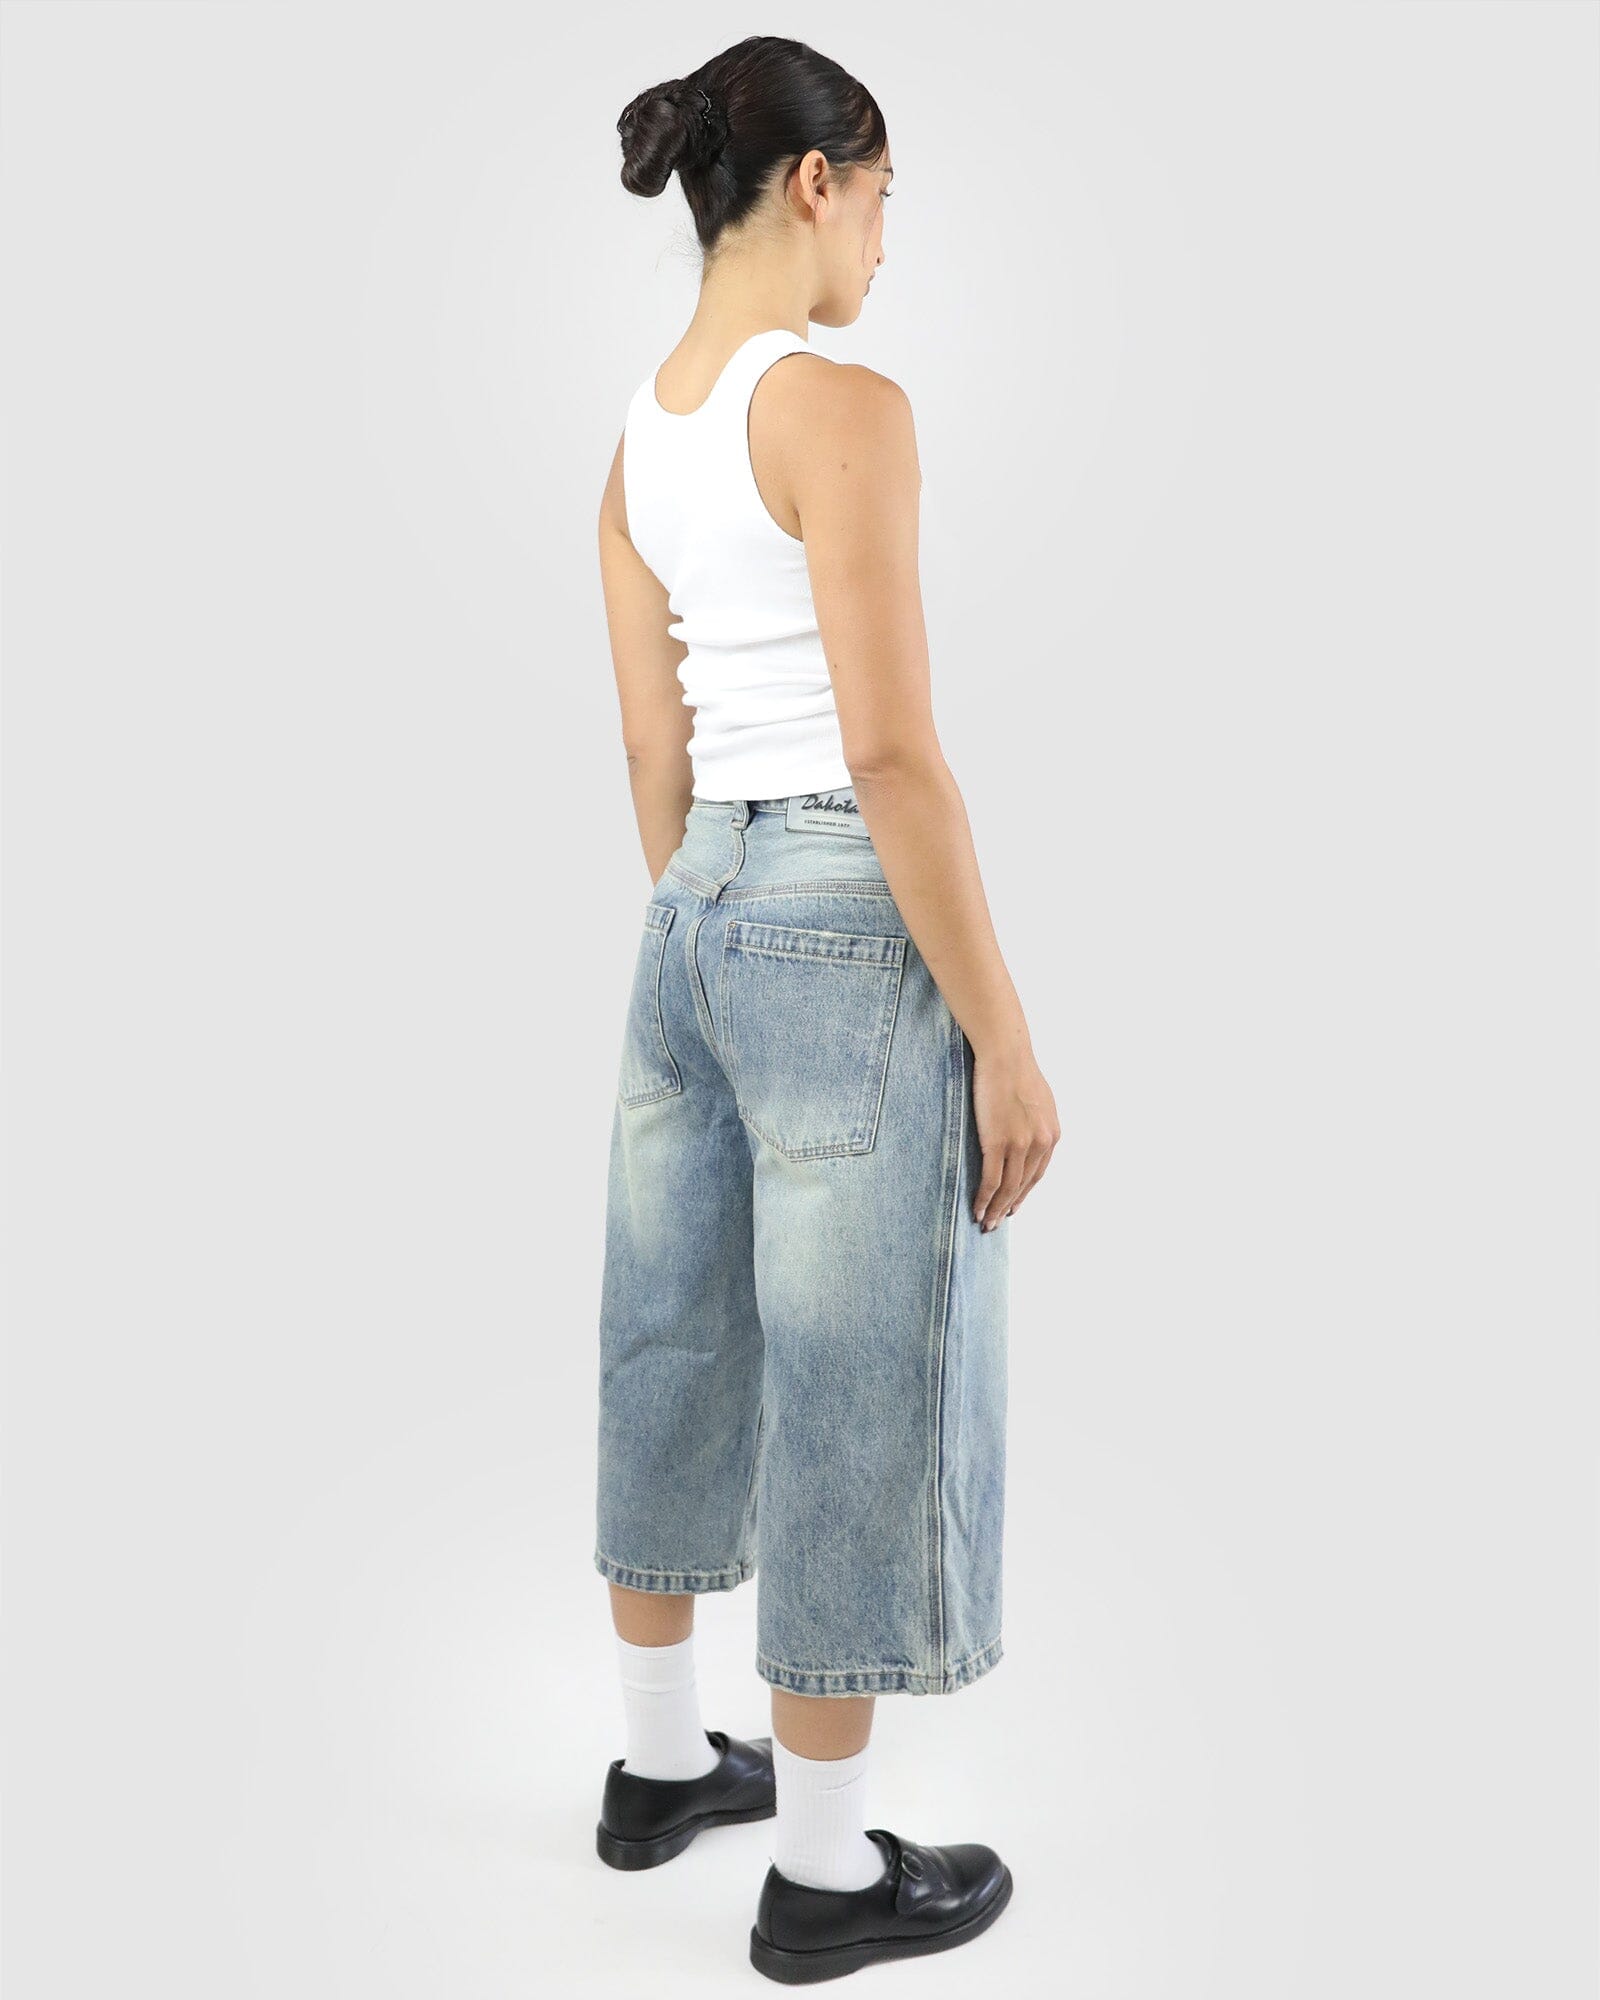 Relaxed 90's Long Jort: Weathered